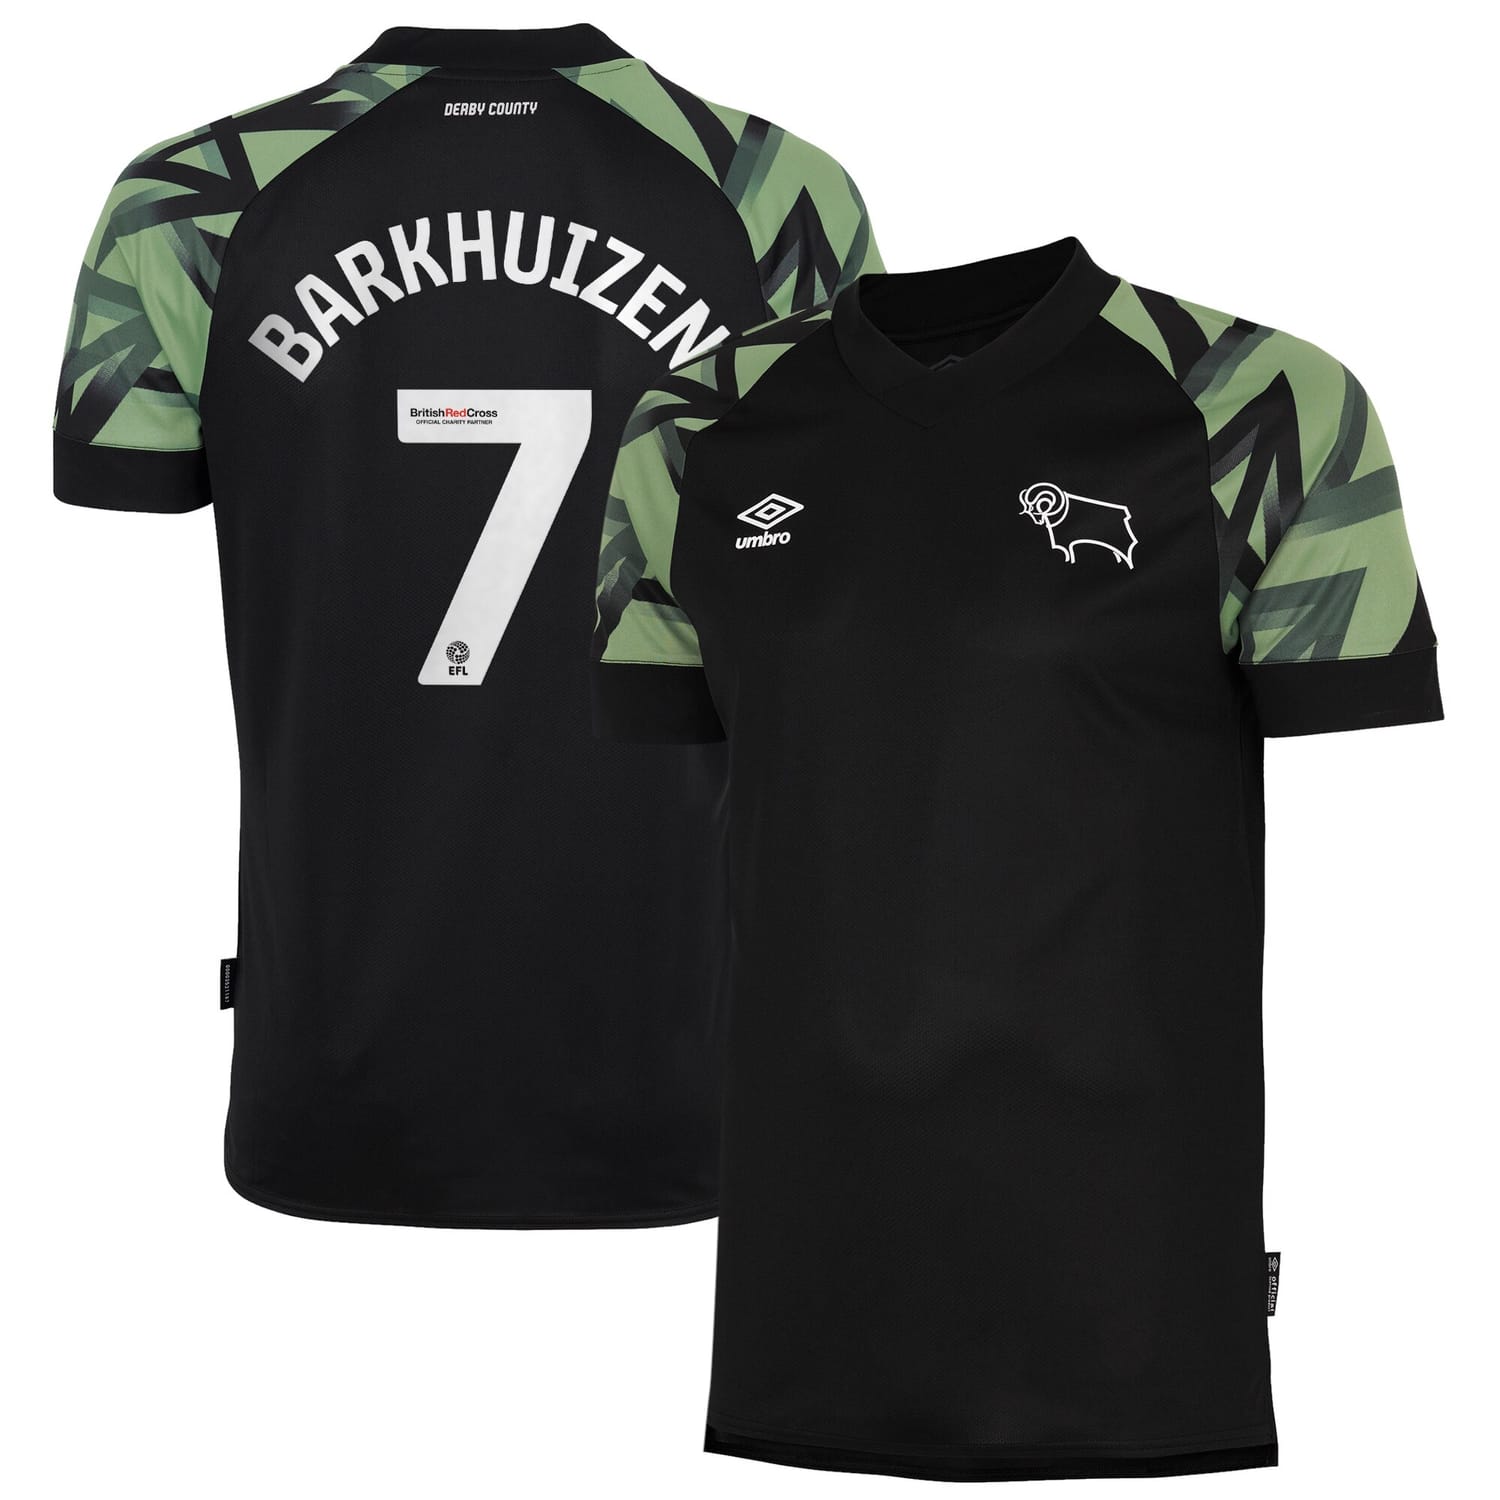 EFL League One Derby County Away Jersey Shirt 2022-23 player Barkhuizen 7 printing for Men